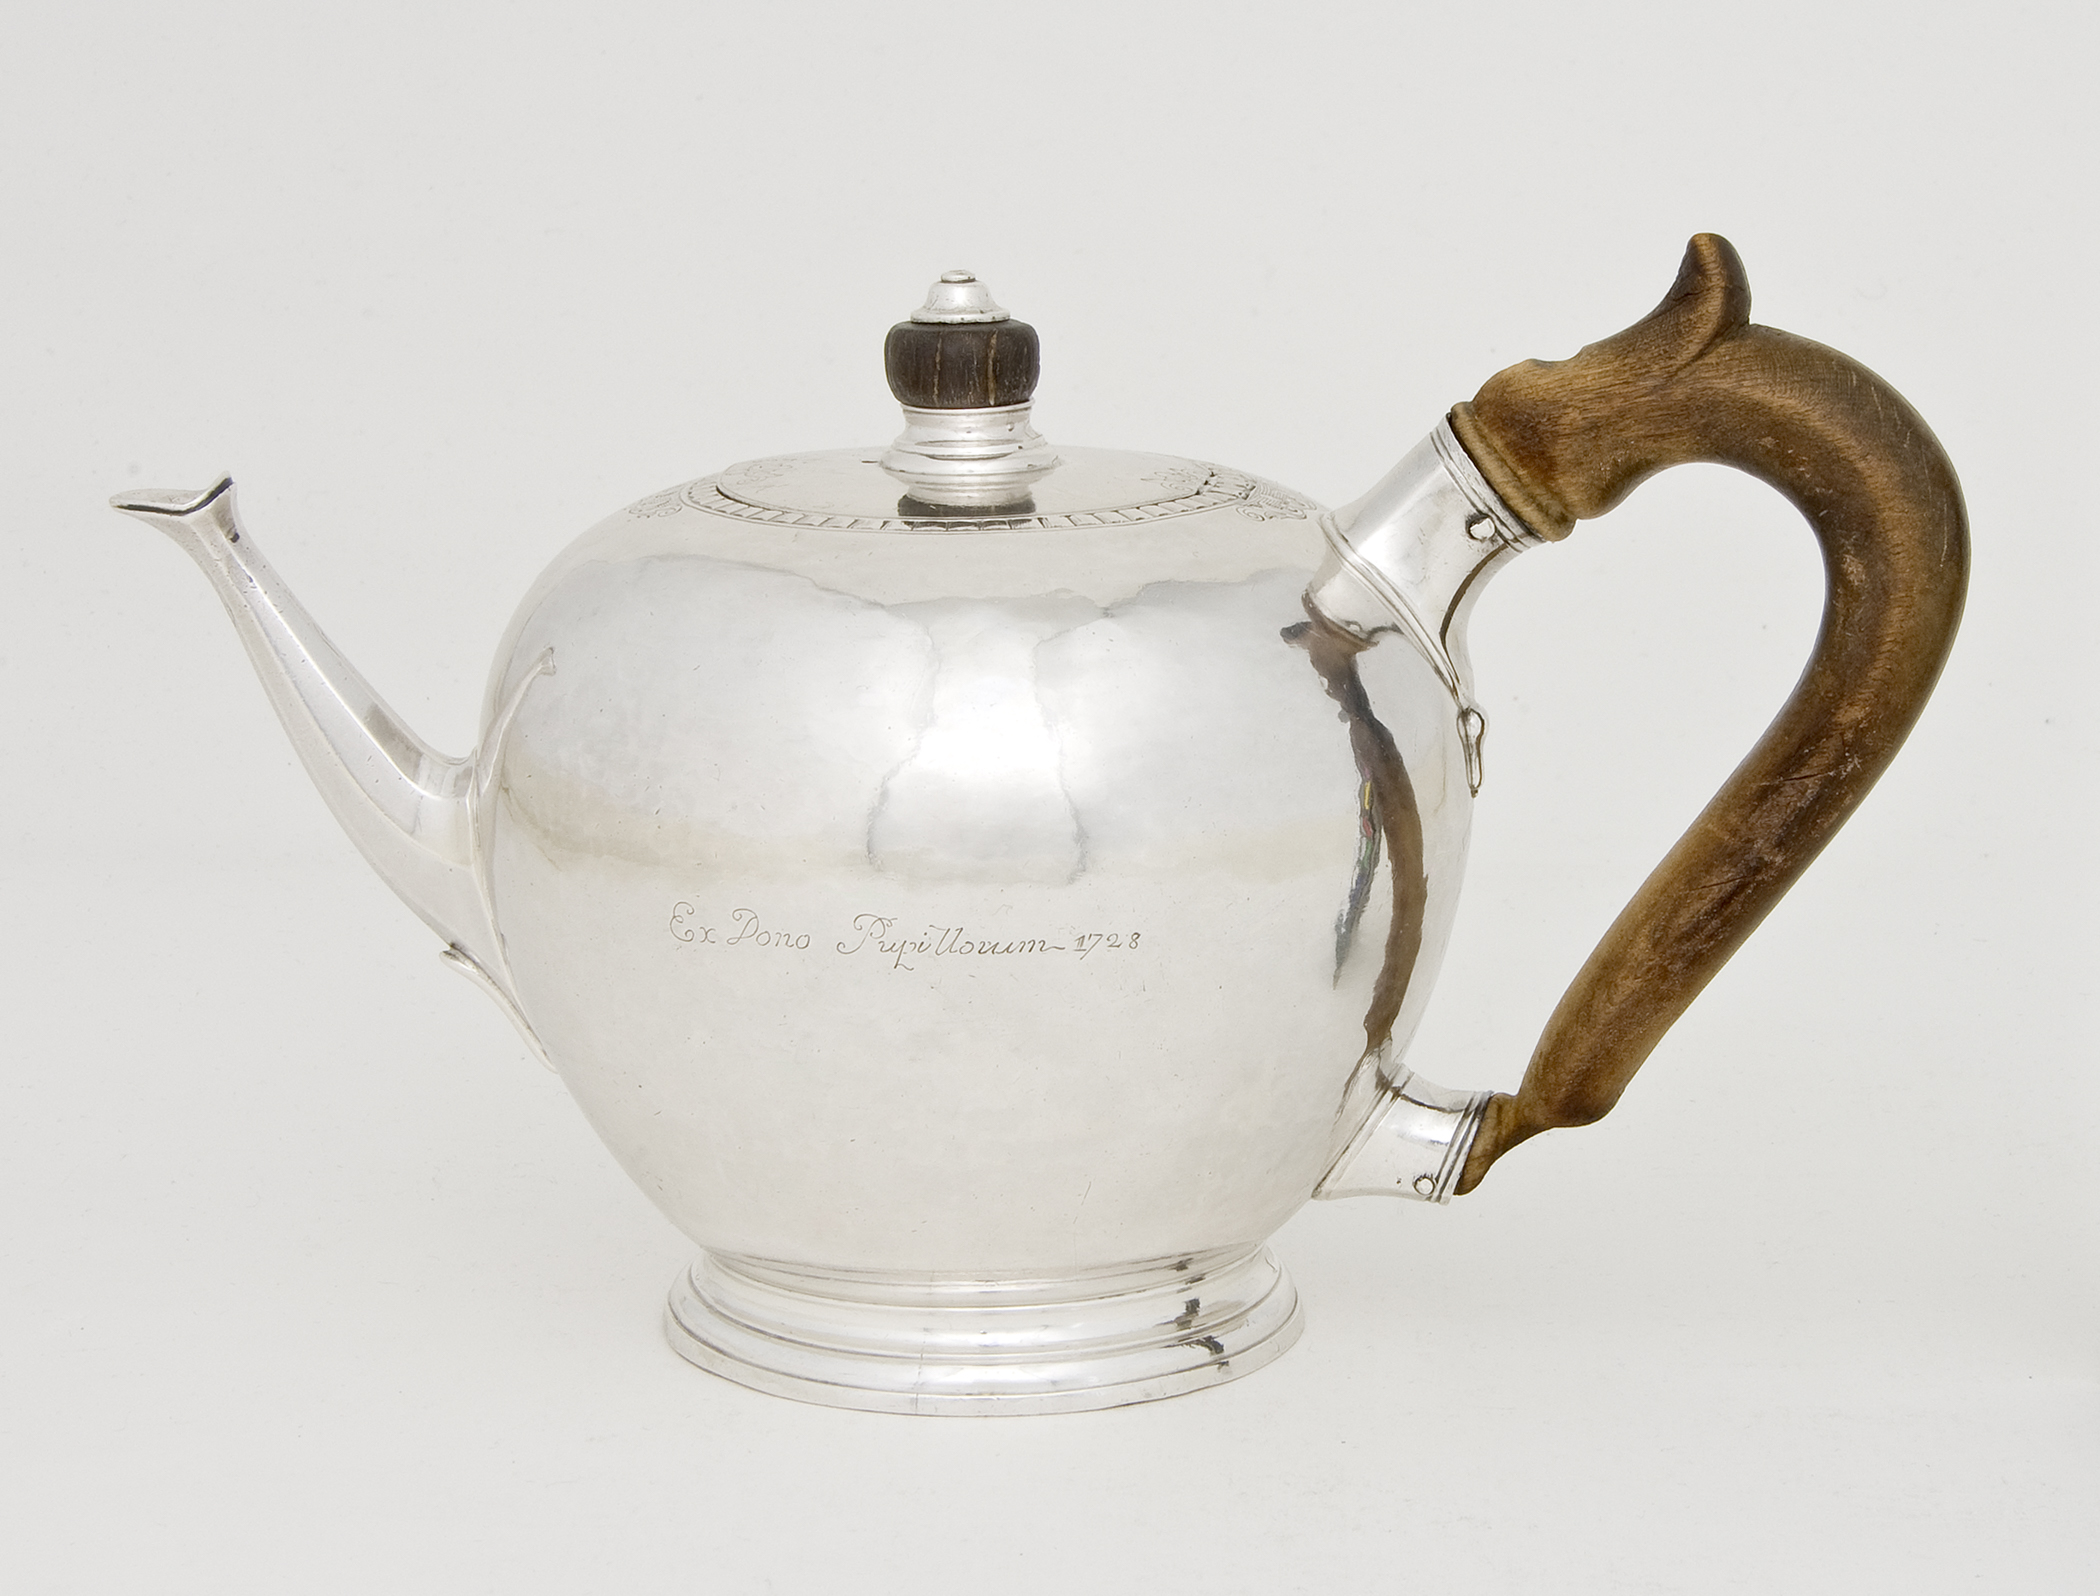 2016.0003 A, B Teapot, view 1, after conservation treatment, cropped